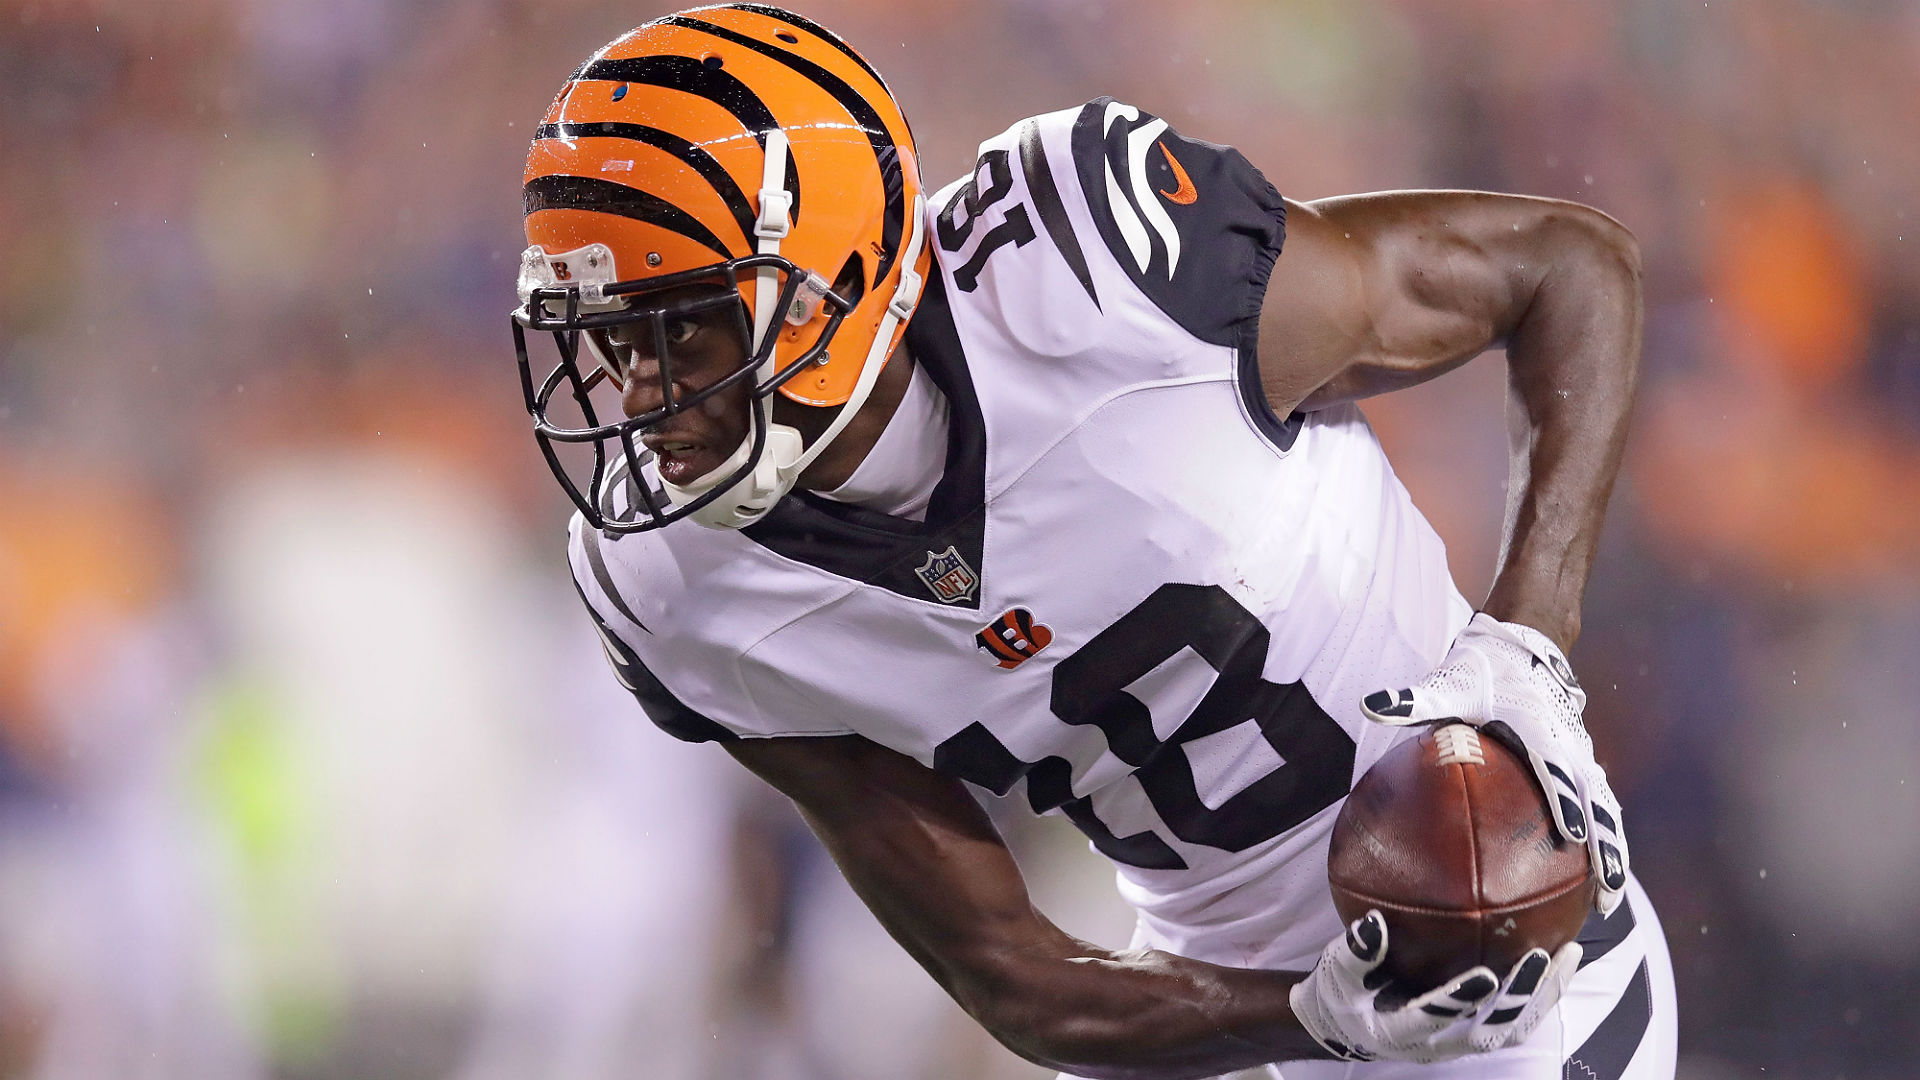 Flipboard: A.J. Green injury update: Bengals receiver (ankle) out of